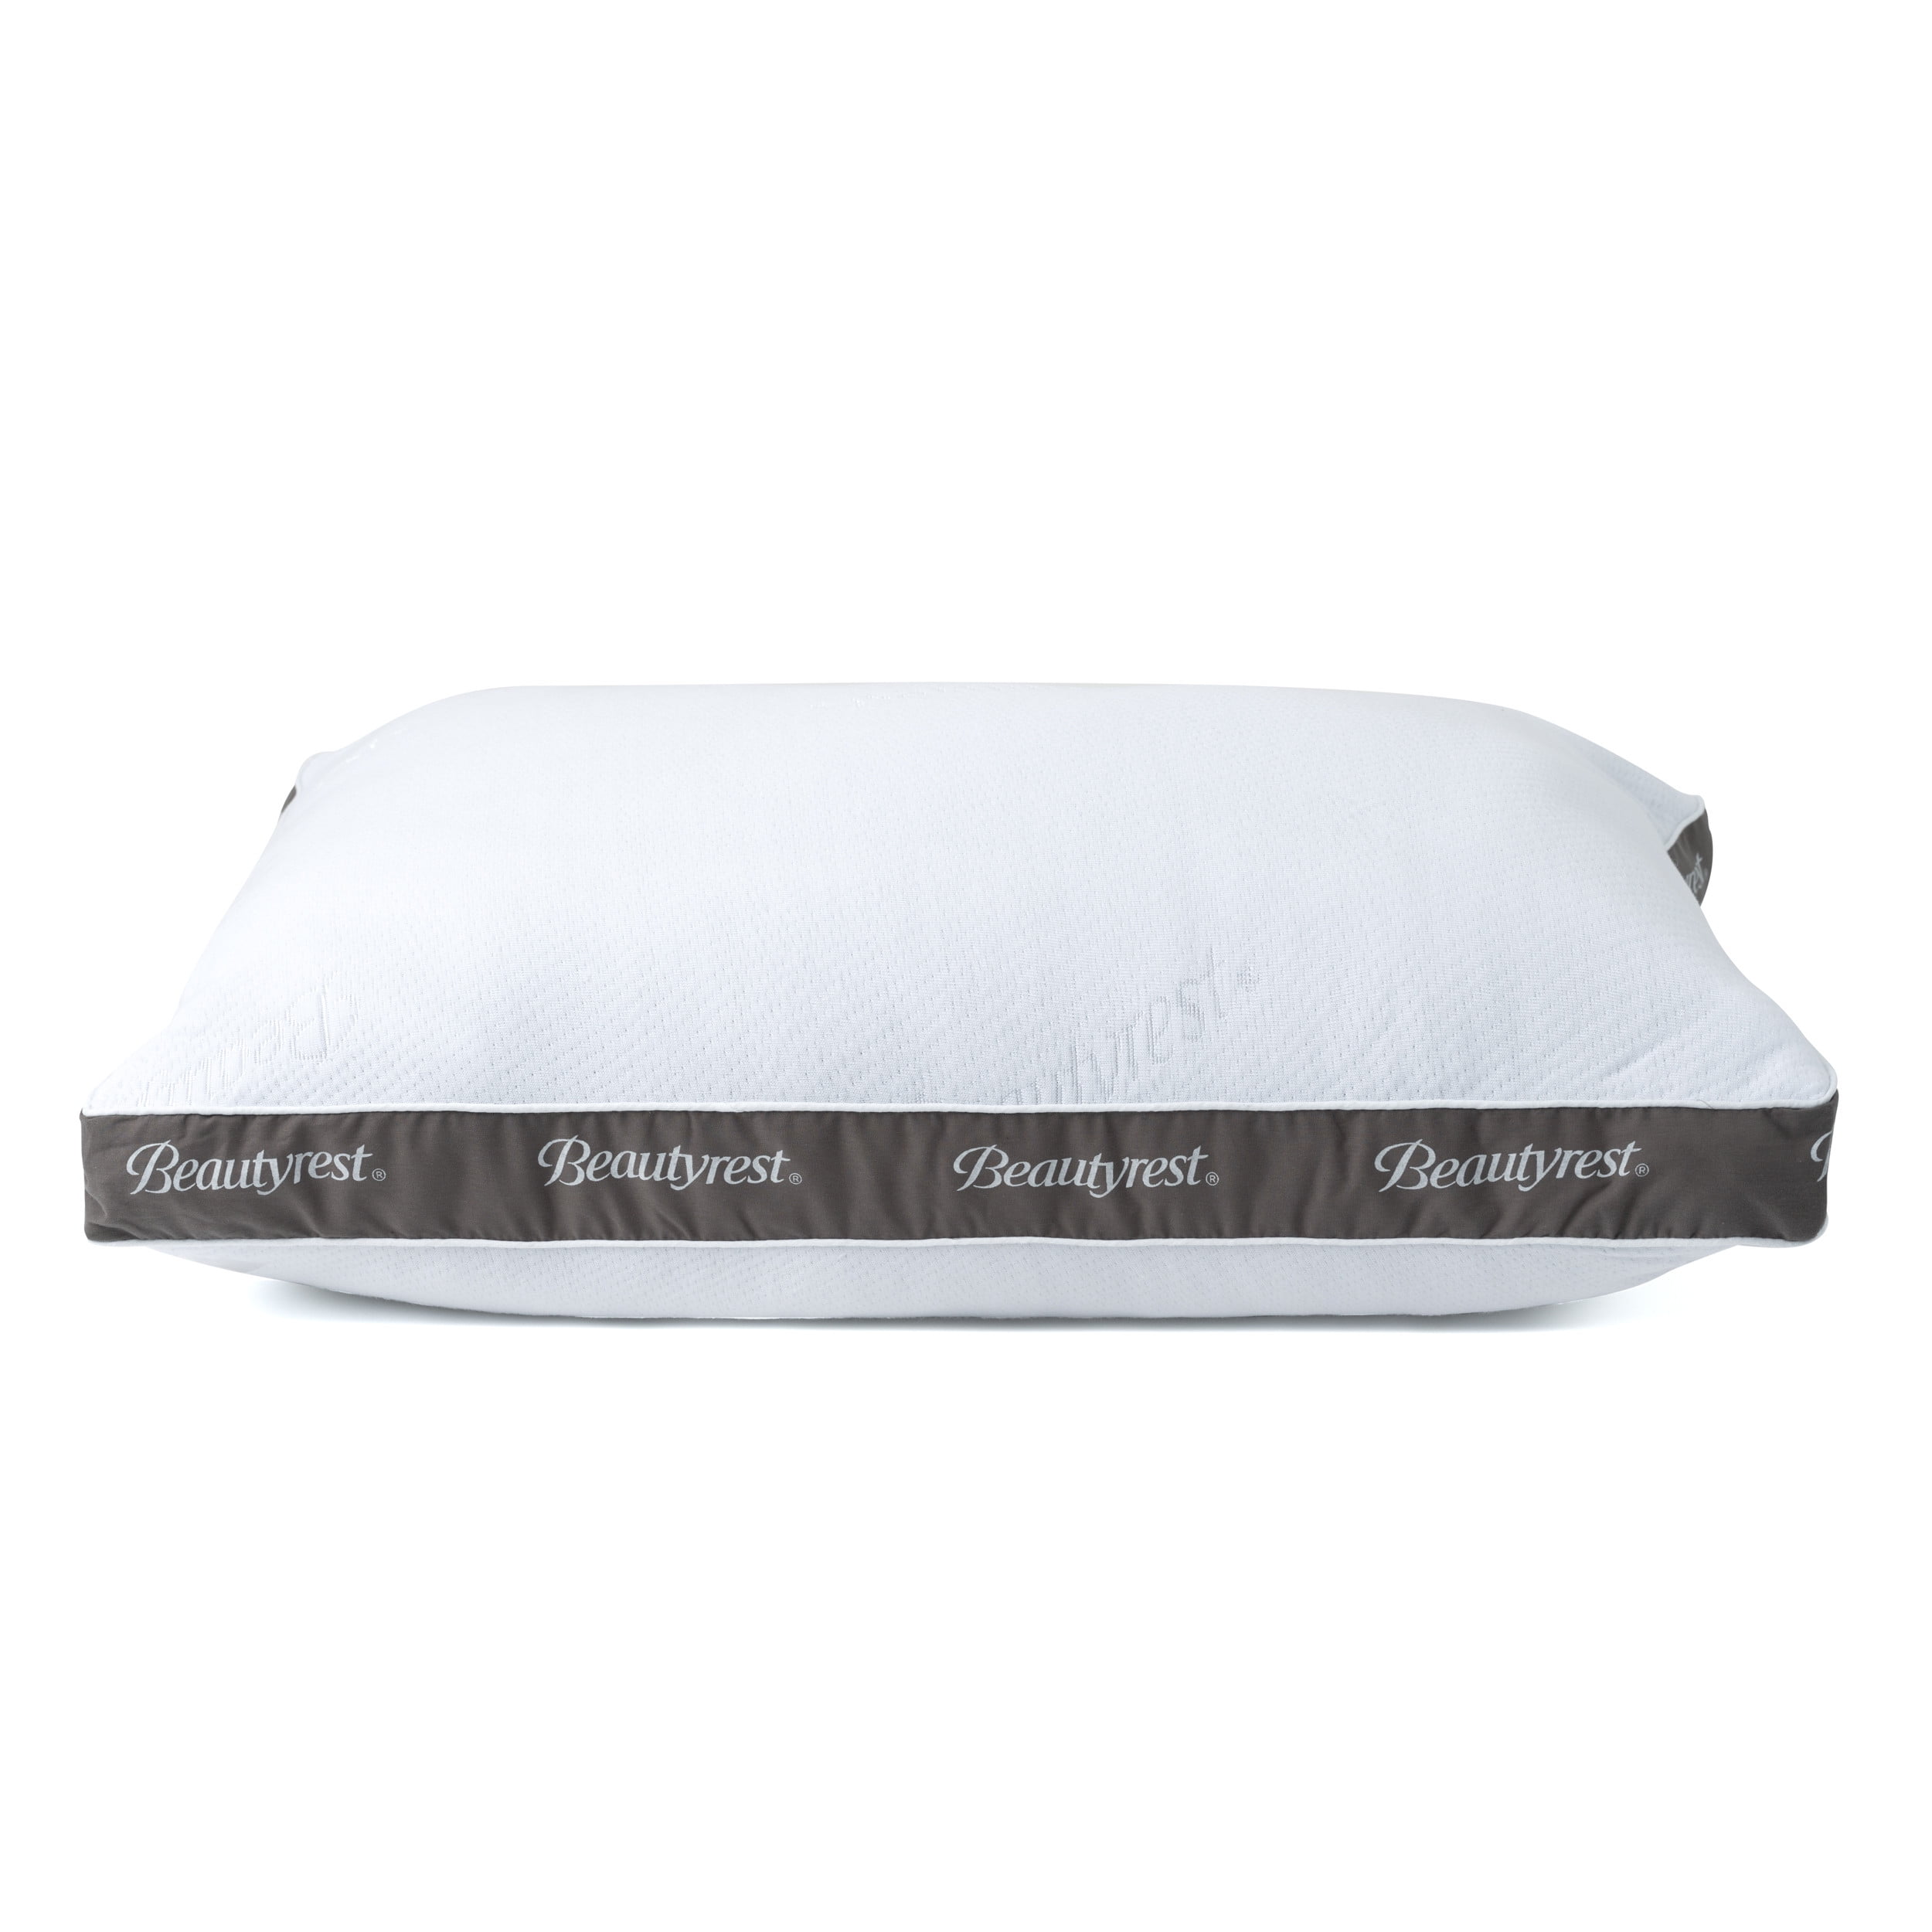 beautyrest pillows for side sleepers